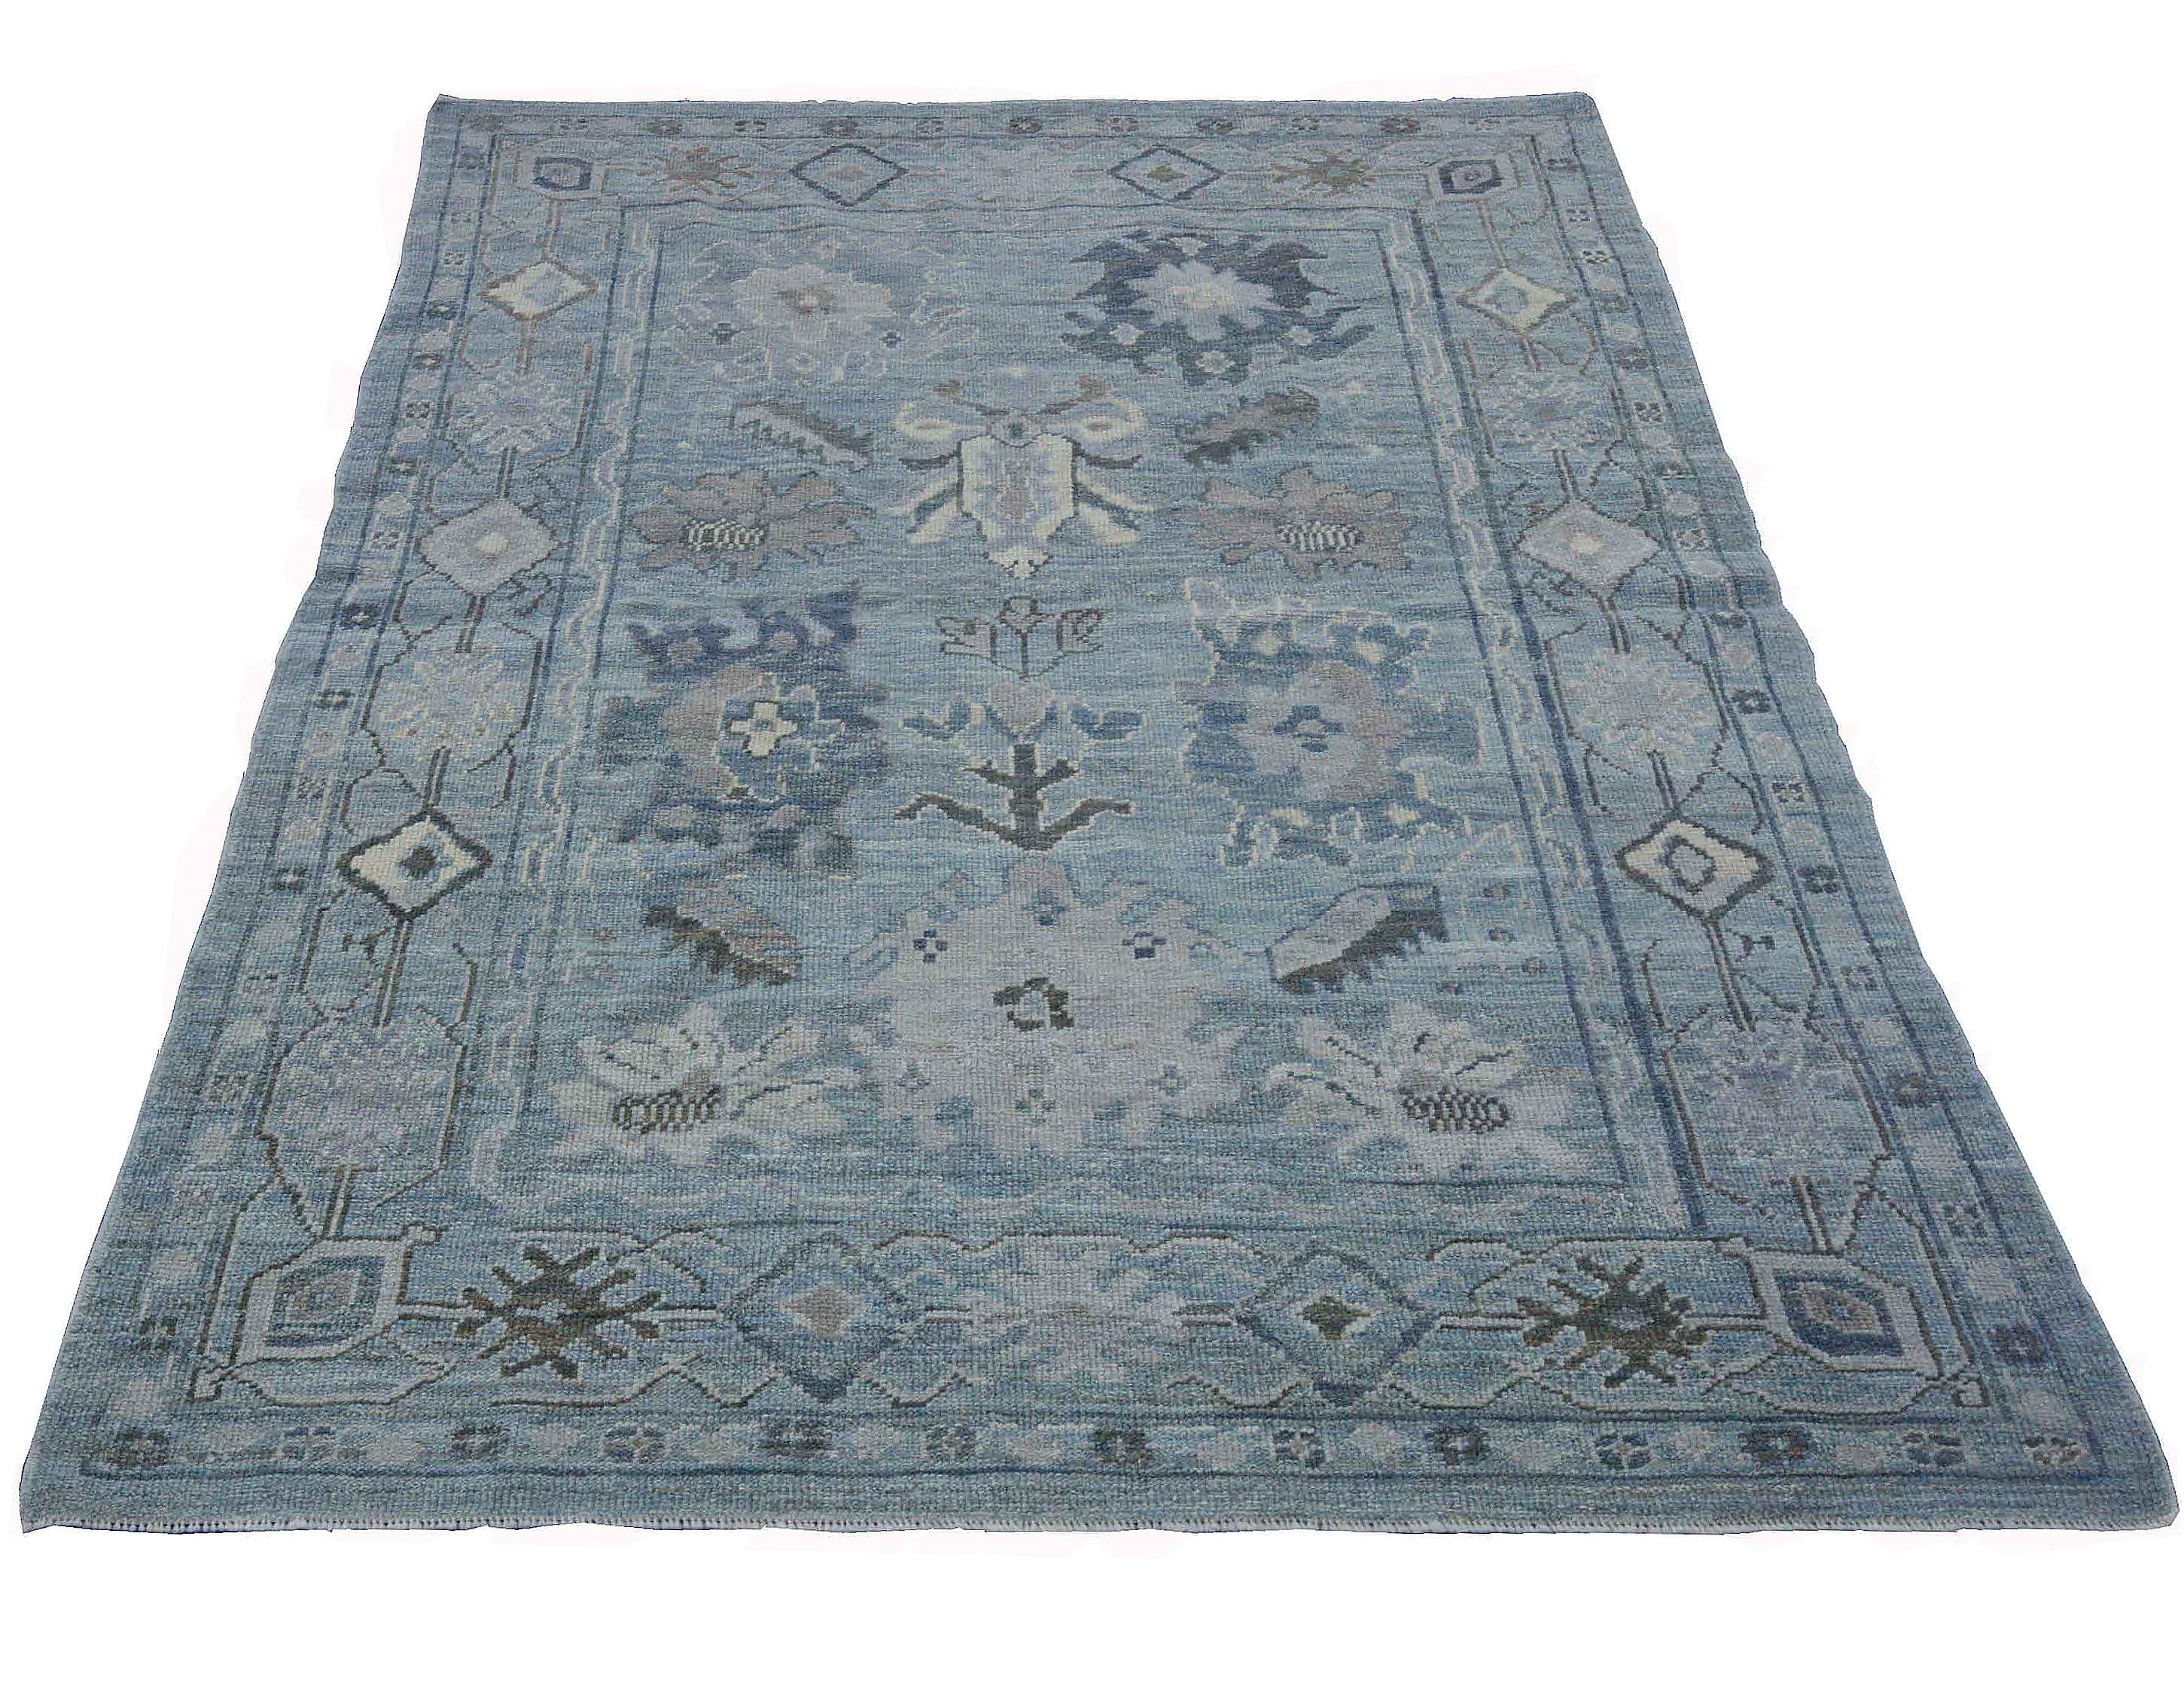 Contemporary Turkish rug made of handwoven sheep’s wool of the finest quality. It’s colored with organic vegetable dyes that are certified safe for humans and pets alike. It features a gorgeous blue field with floral details in navy, white and gray